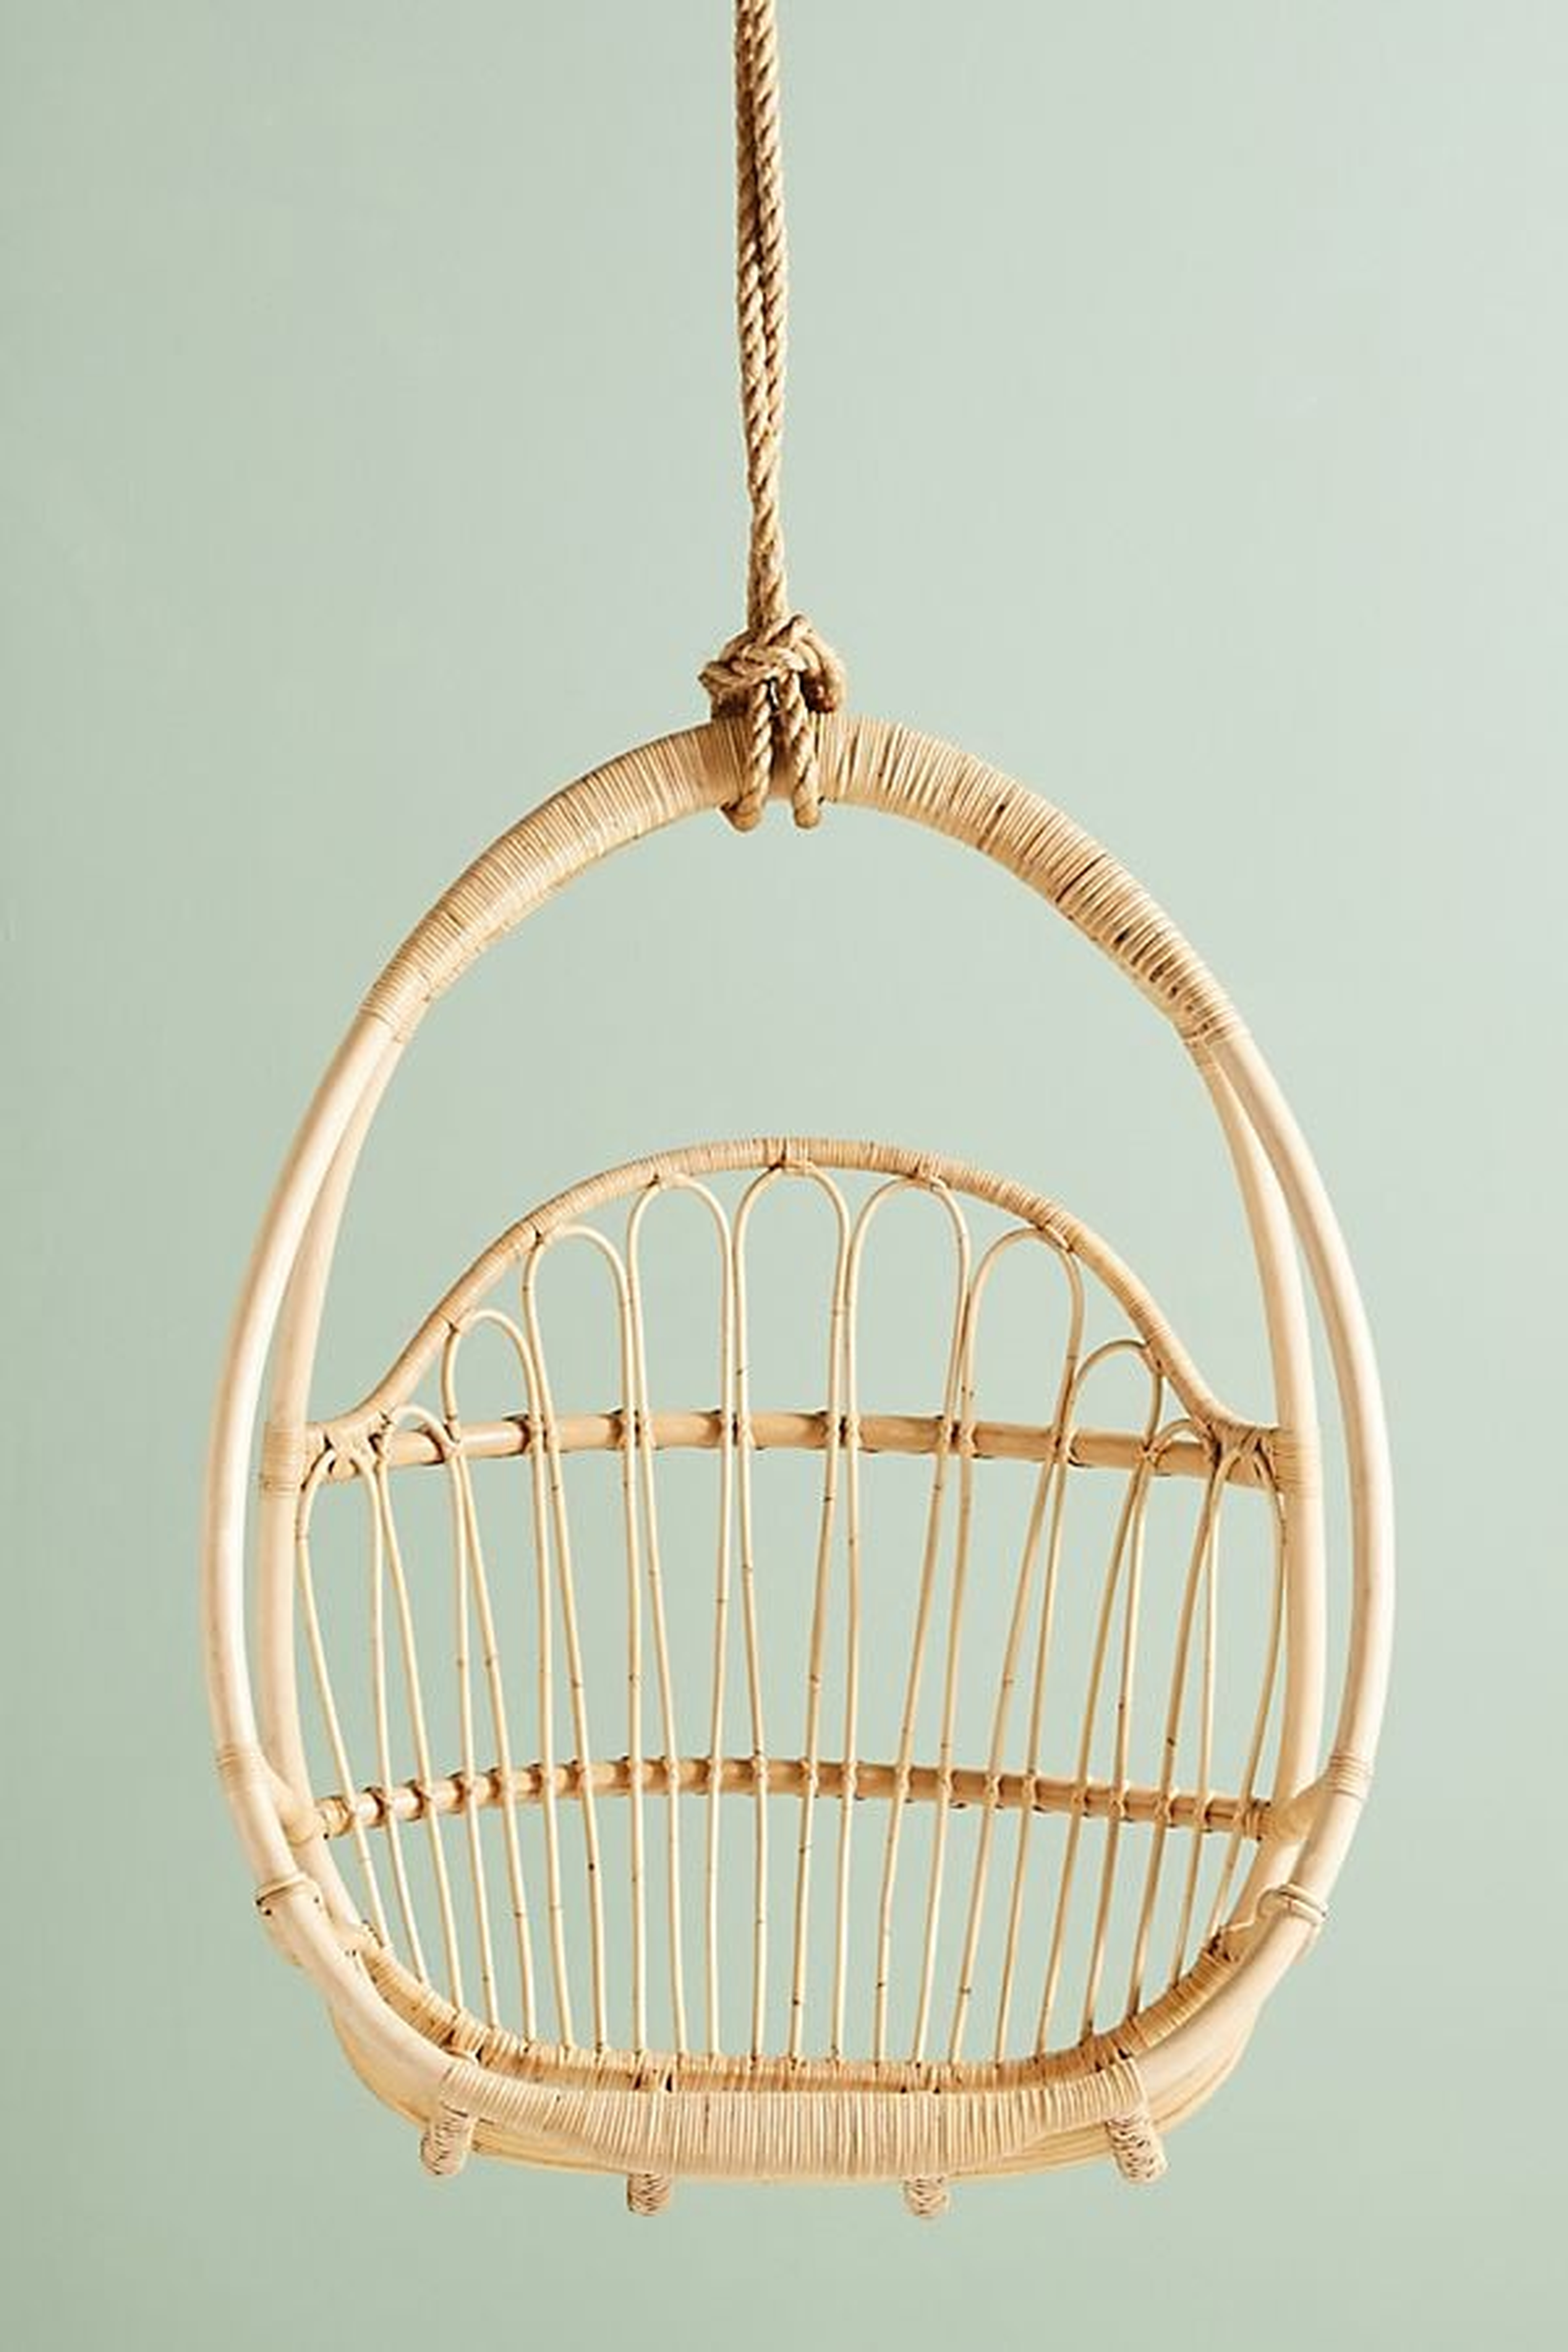 Woven Hanging Chair - Anthropologie